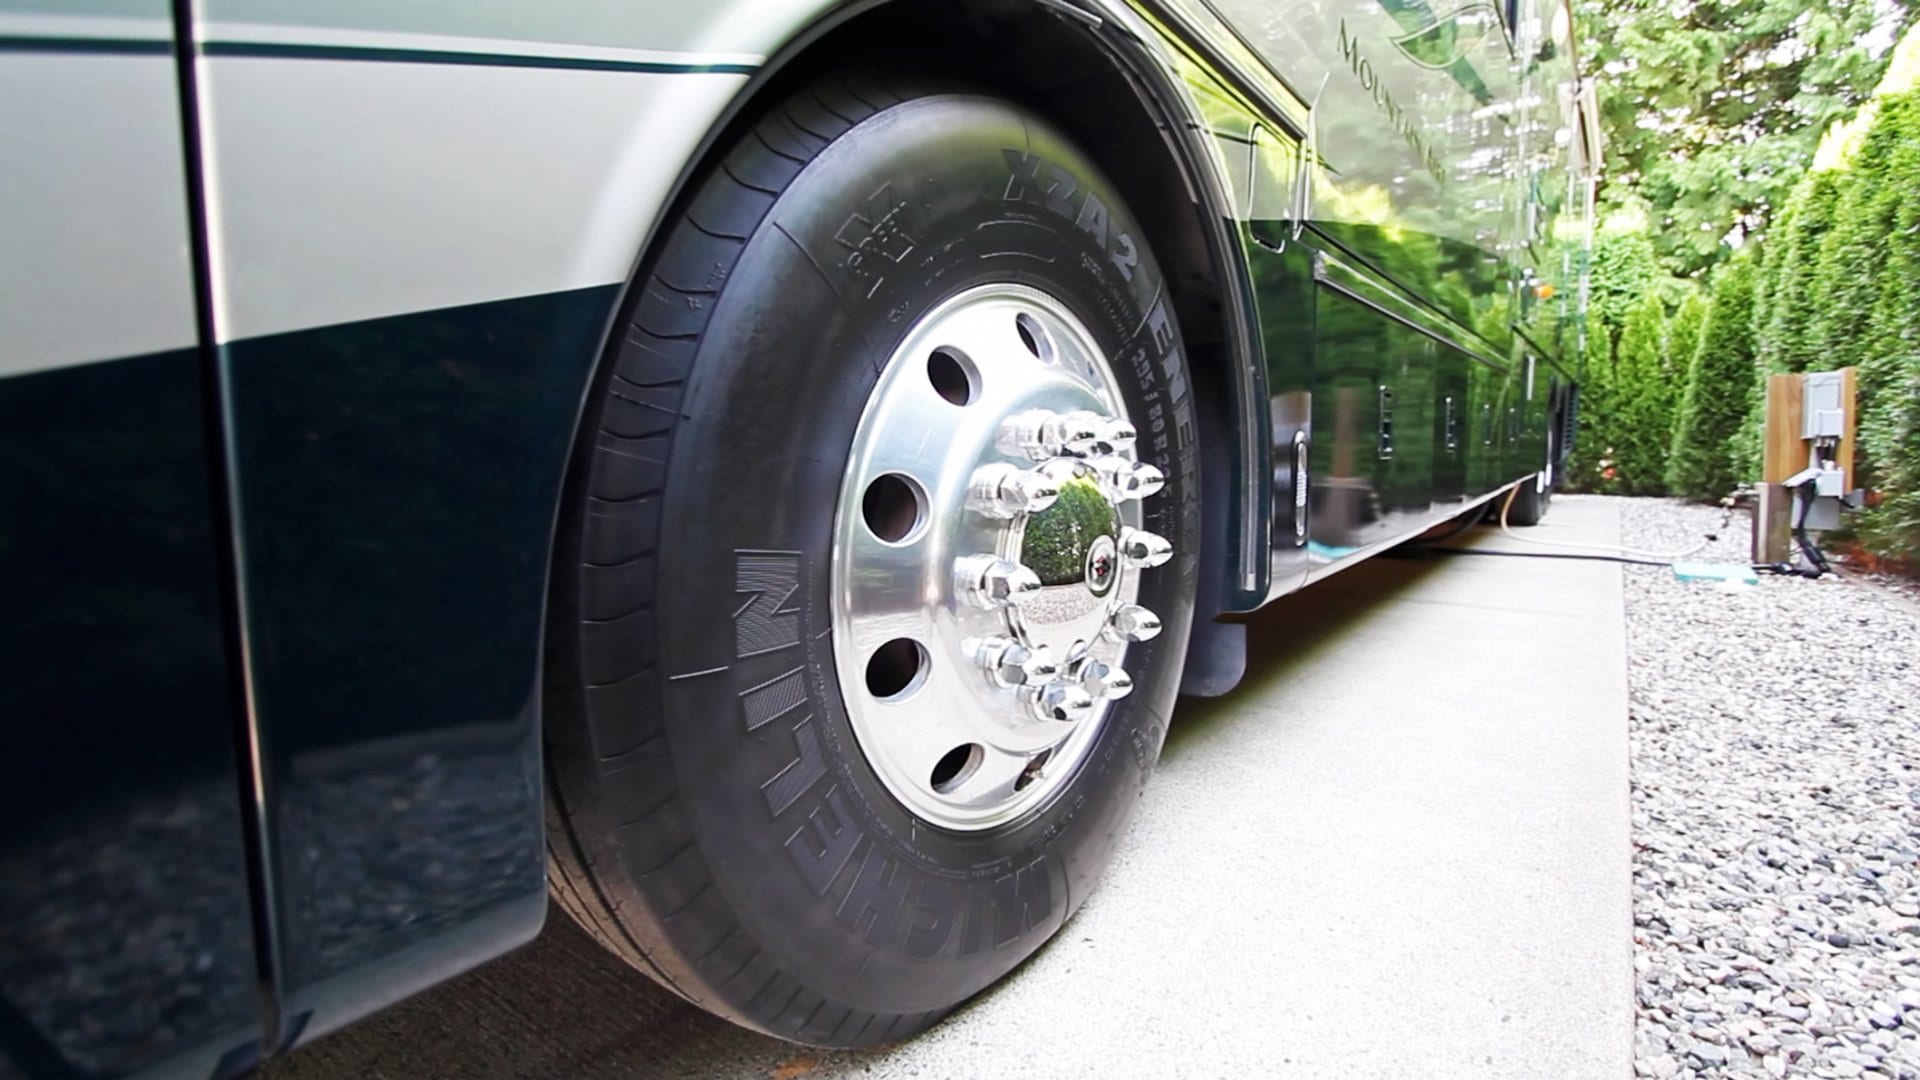 RV tires are a significent investment. Use RV tire covers to protect them.